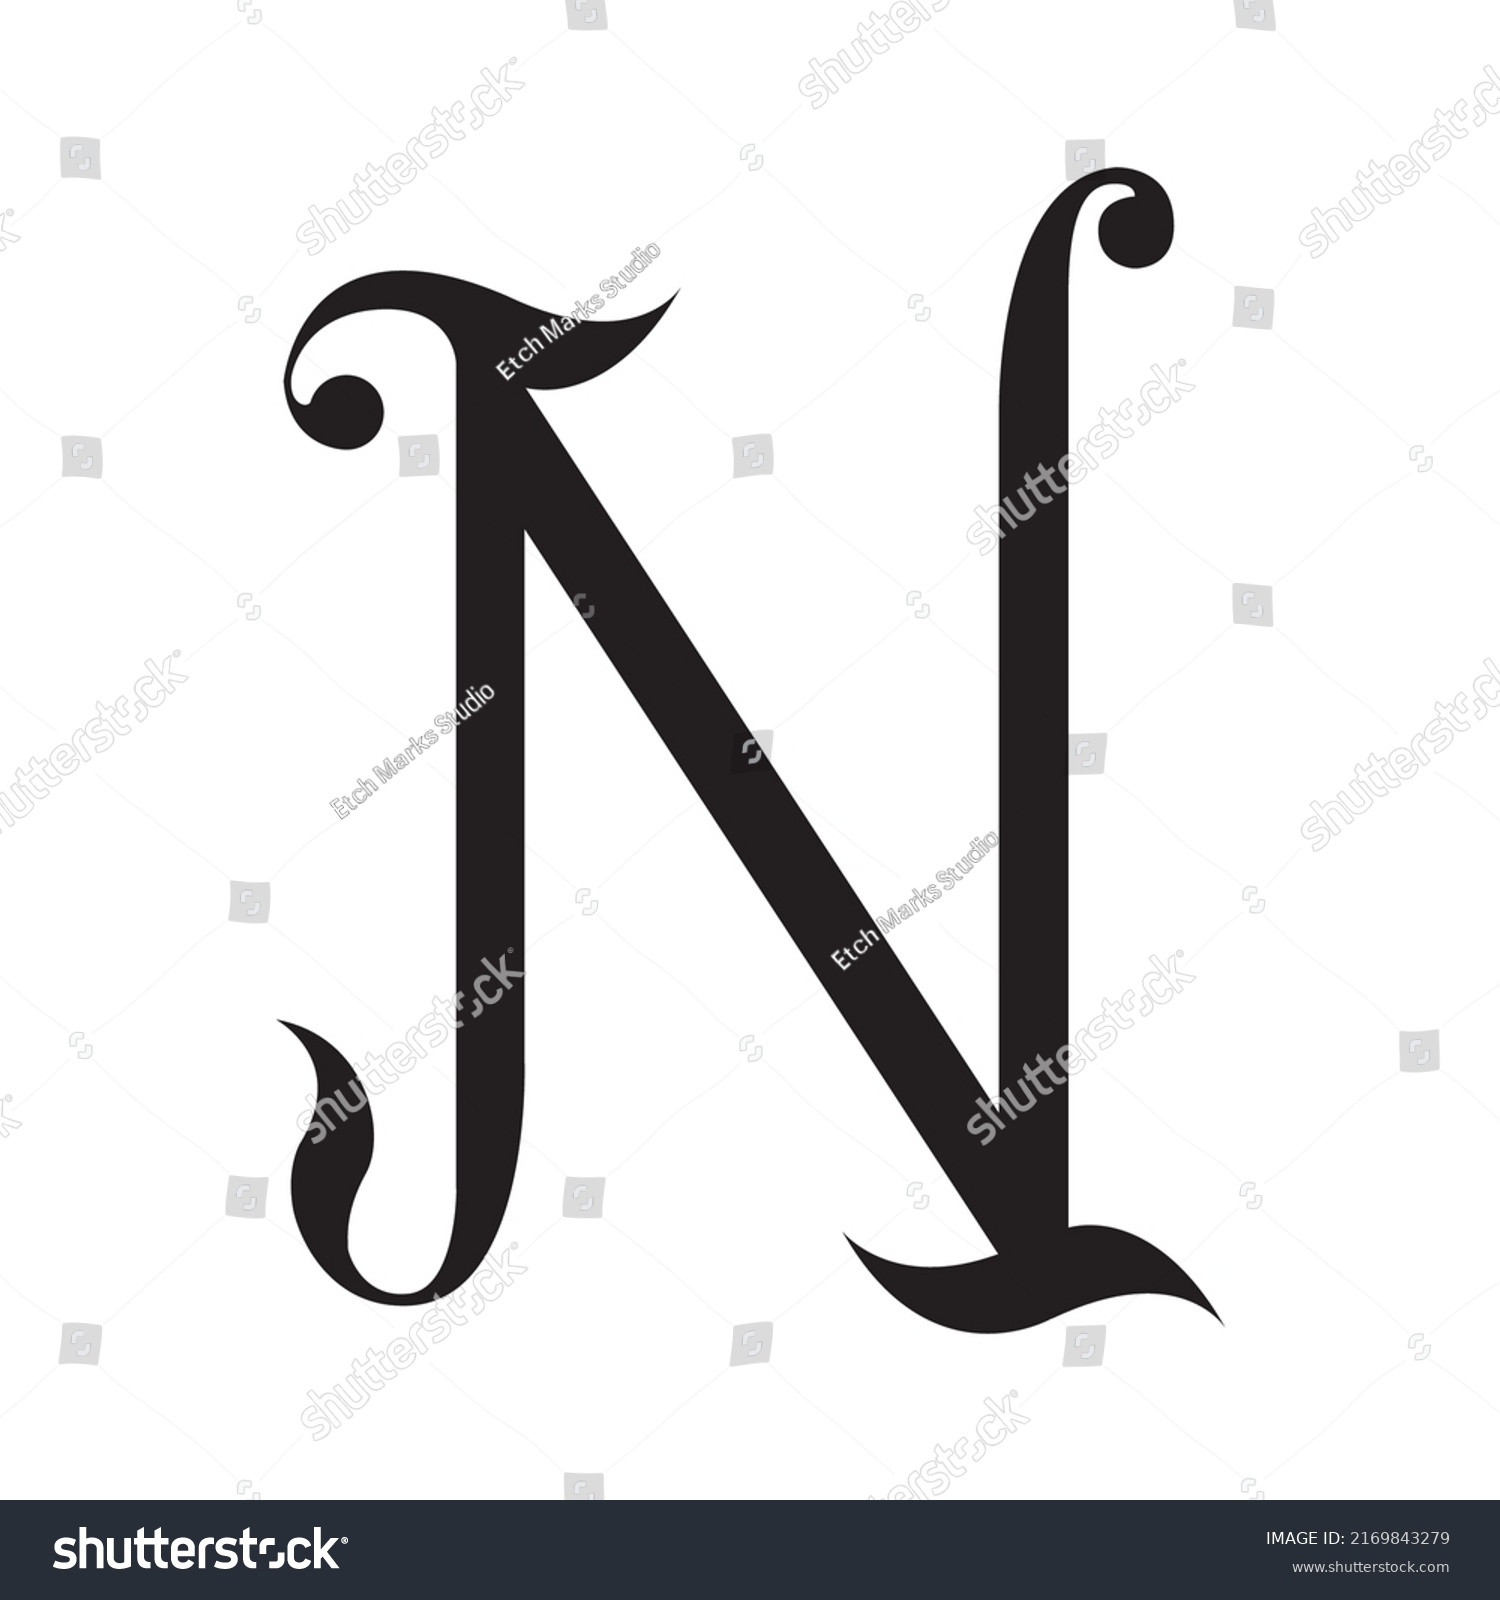 Alphabet Letter N Classical Style Vector Stock Vector (Royalty Free ...